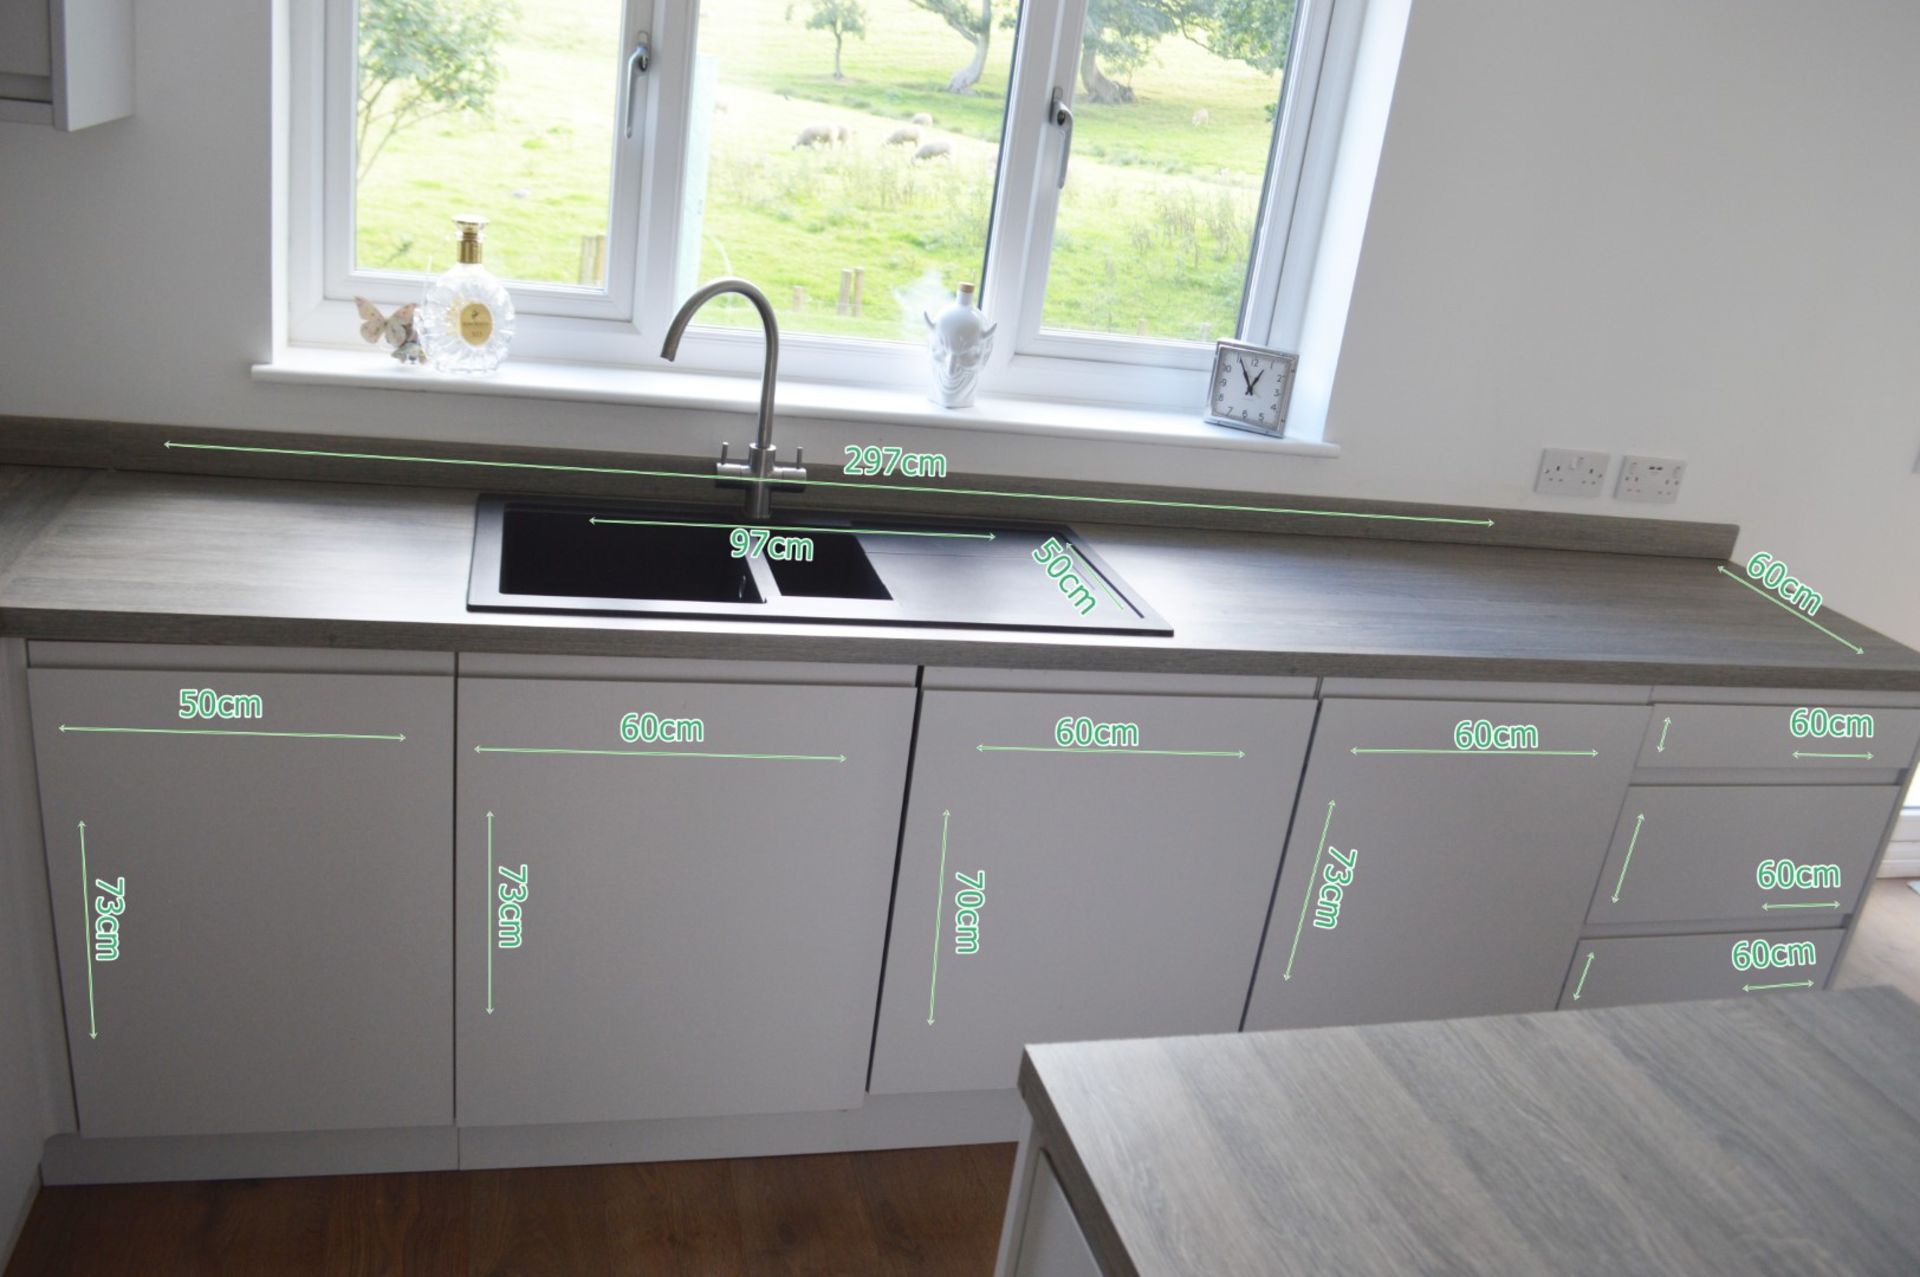 1 x Contemporary Handleless Fitted Kitchen Featuring A White Finish, Laminate Worktops, And - Image 18 of 28